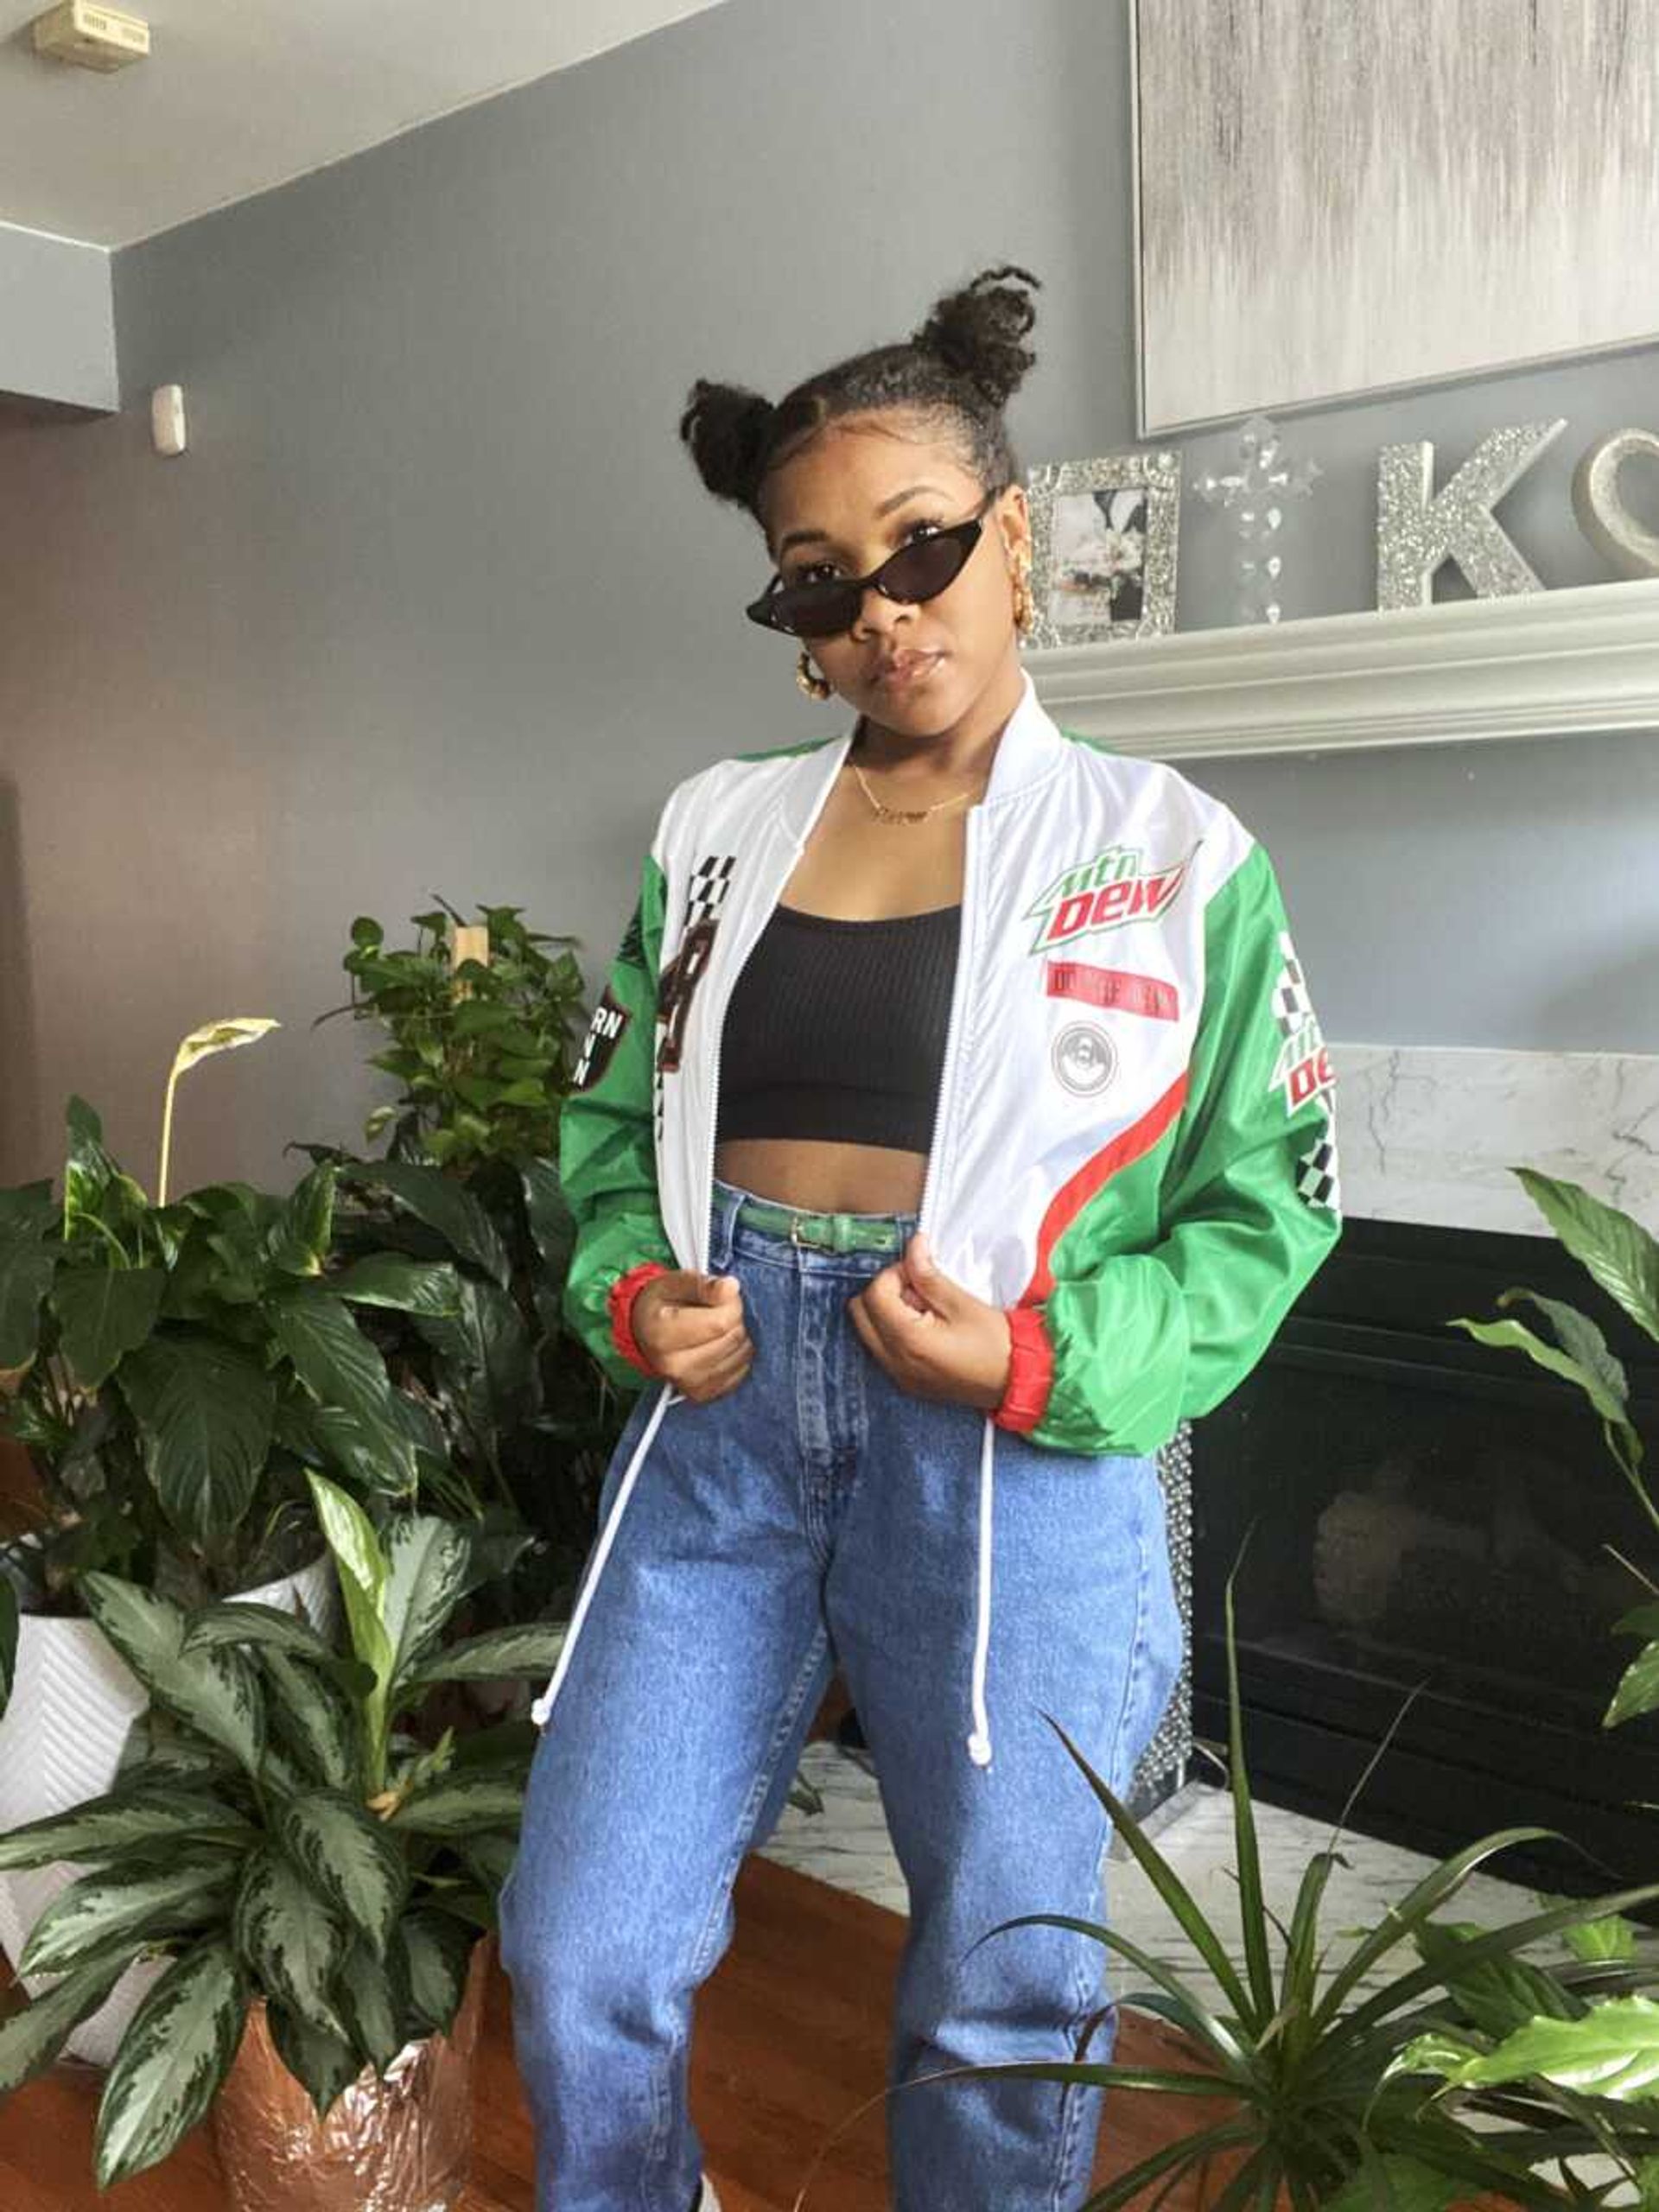 SEMO Alumna Karis Gamble models for her resale thrift business Kare to Thrift. Her shop uses Instagram and Facebook to promote her unique, thrifted clothing items and show how they can be styled.